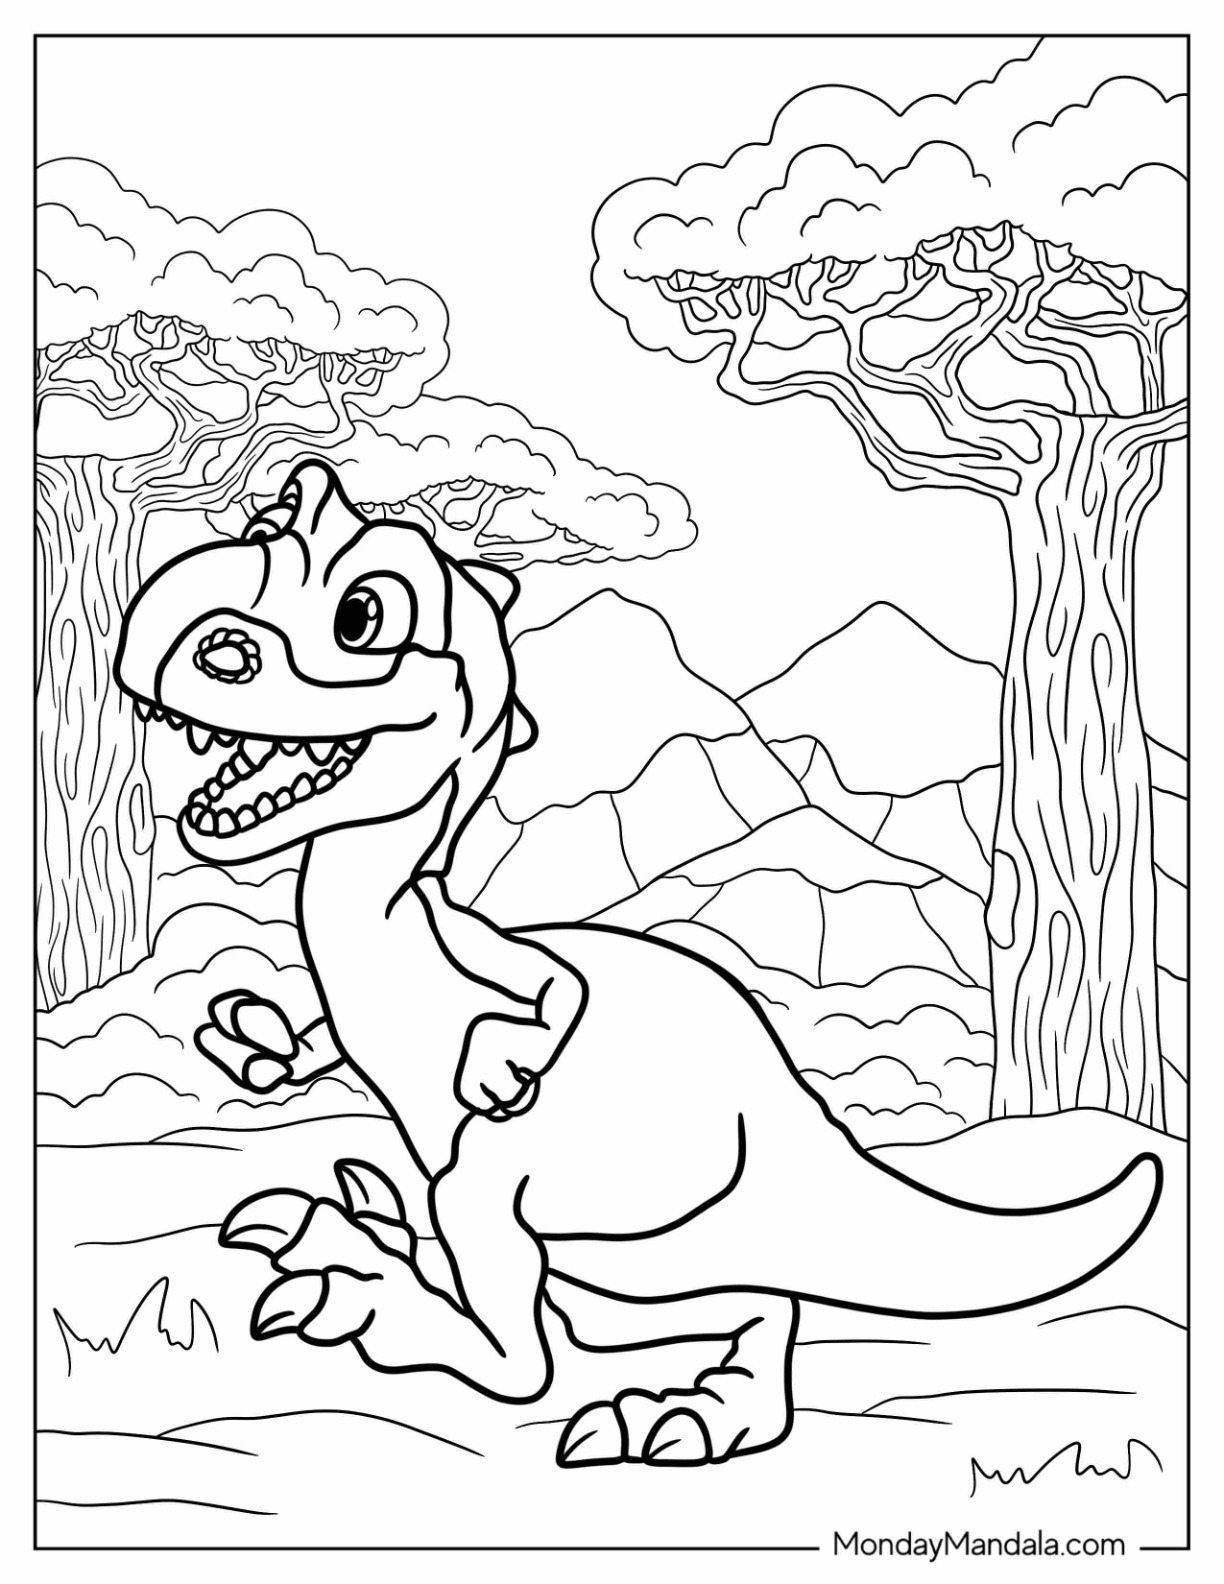 Ice age coloring pages free pdf printables